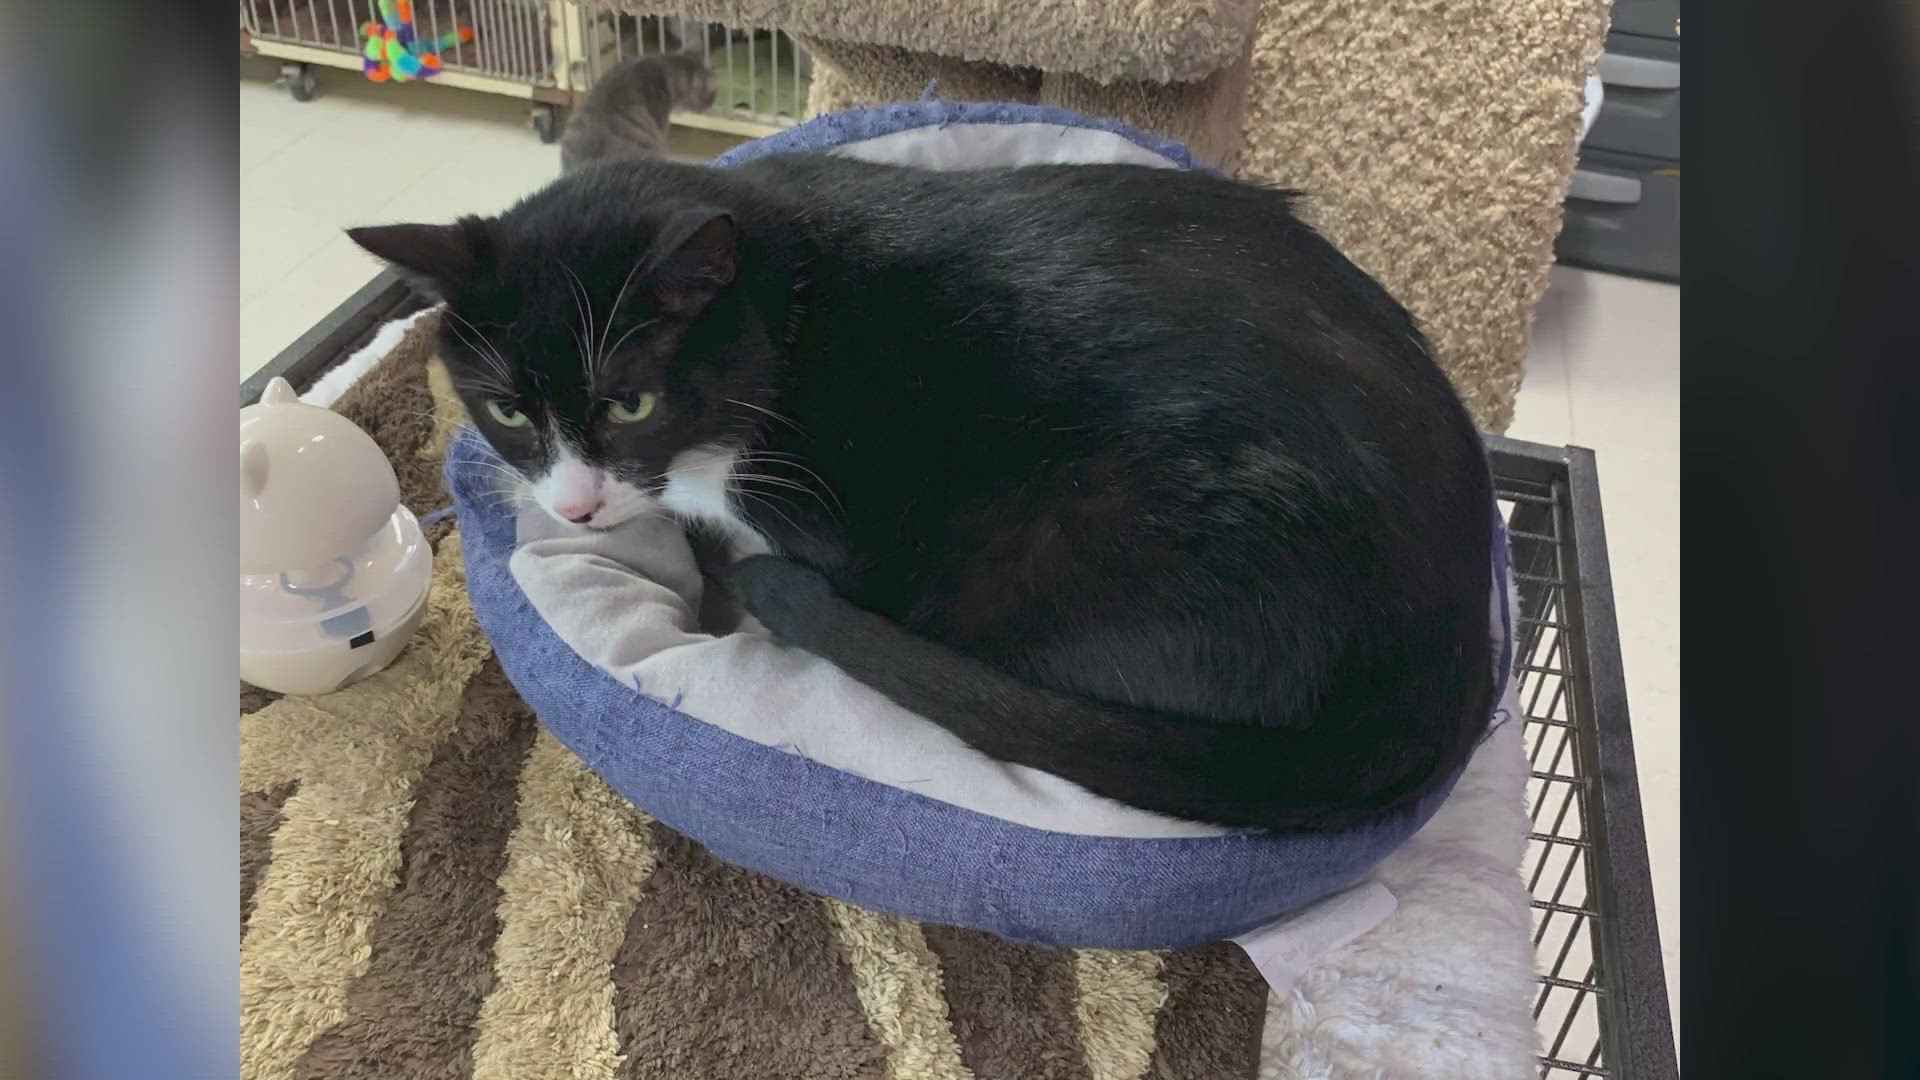 6-year-old Tuxedo cat has been at shelter his whole life 